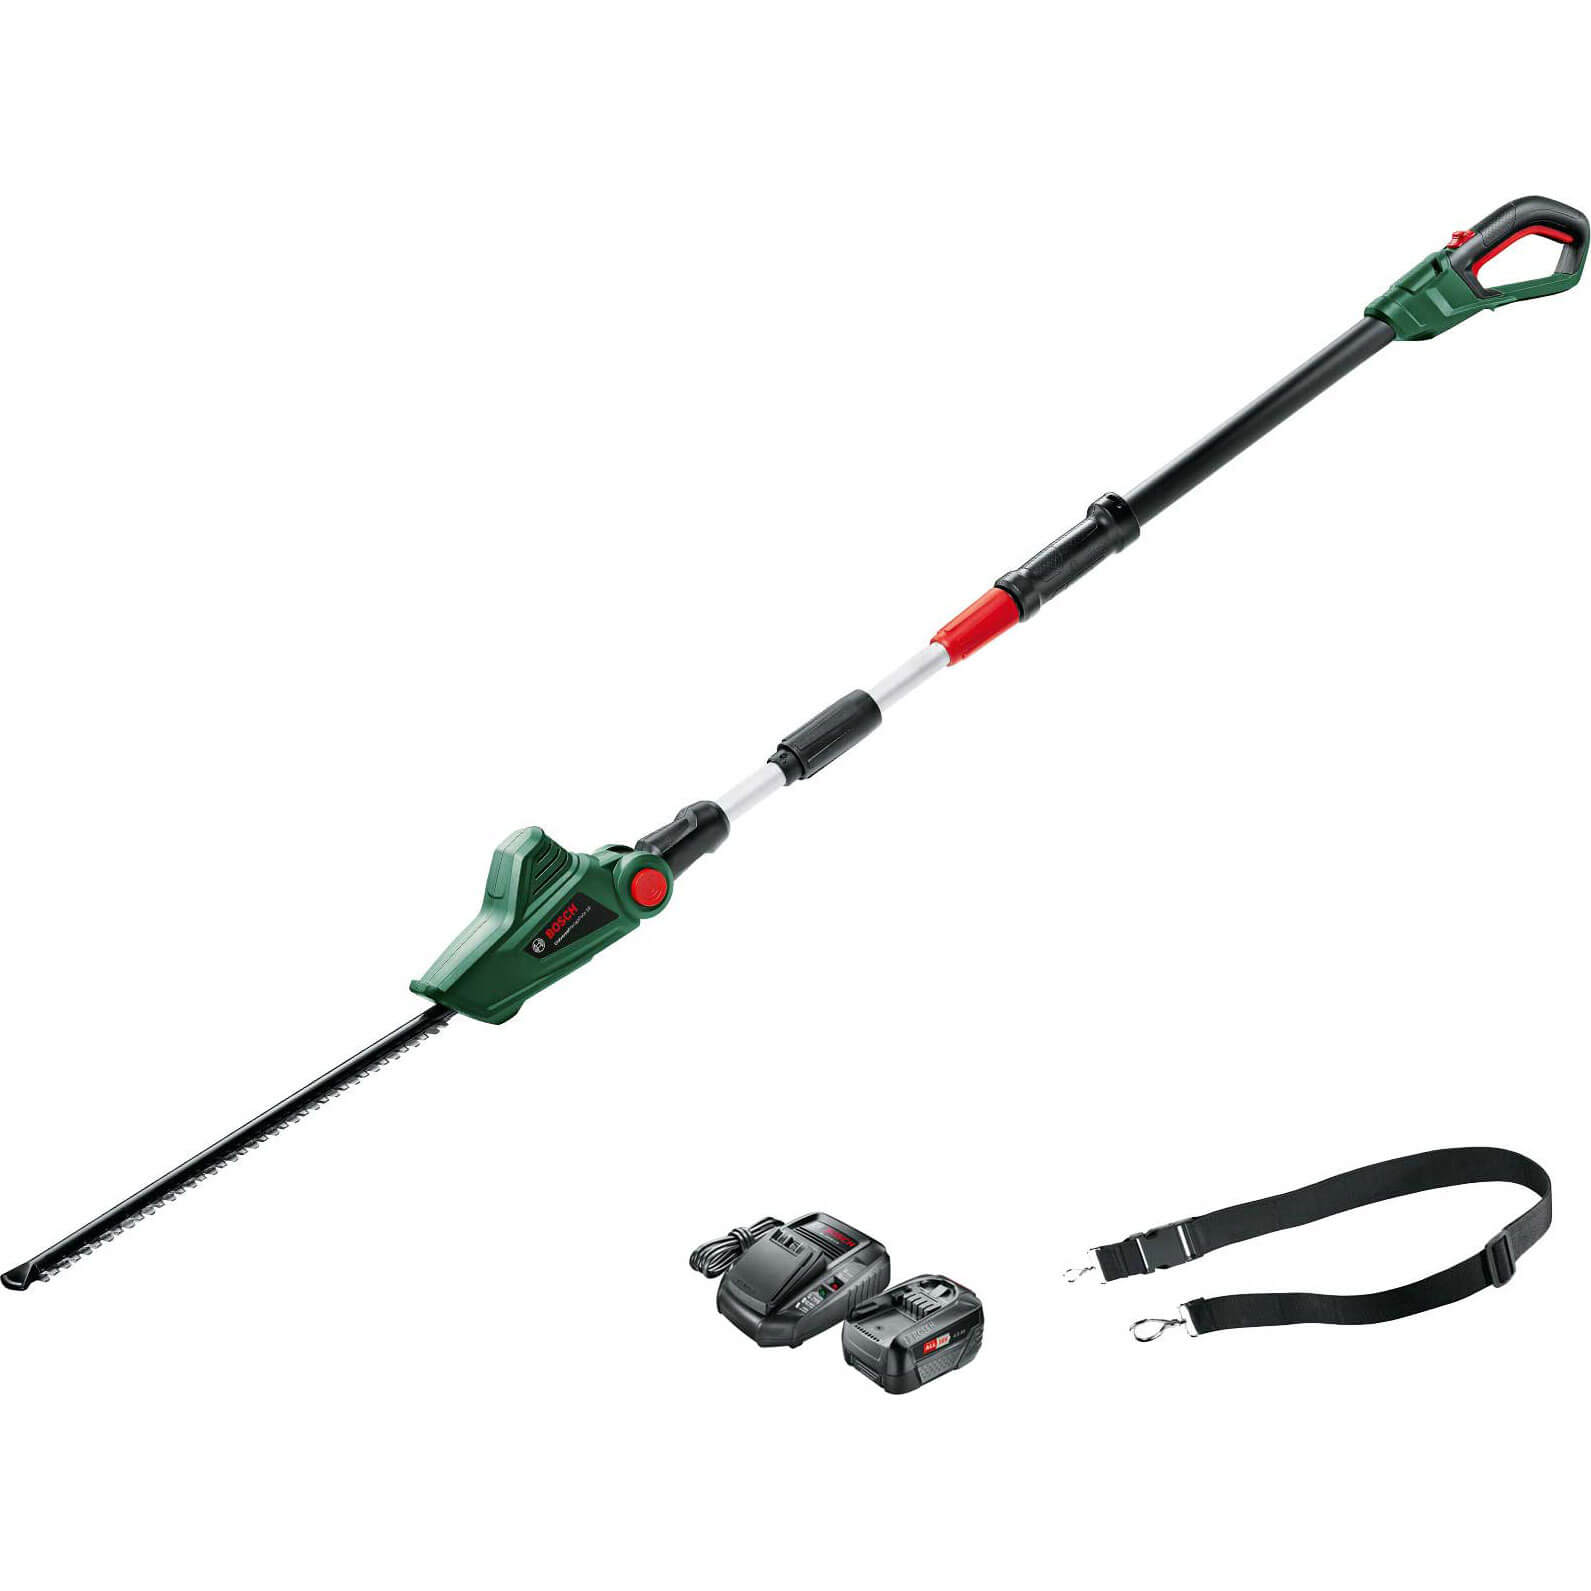 Bosch UNIVERSALHEDGEPOLE P4A 18v Cordless Telescopic Pole Hedge Trimmer 430mm 1 x 4ah Li-ion Charger